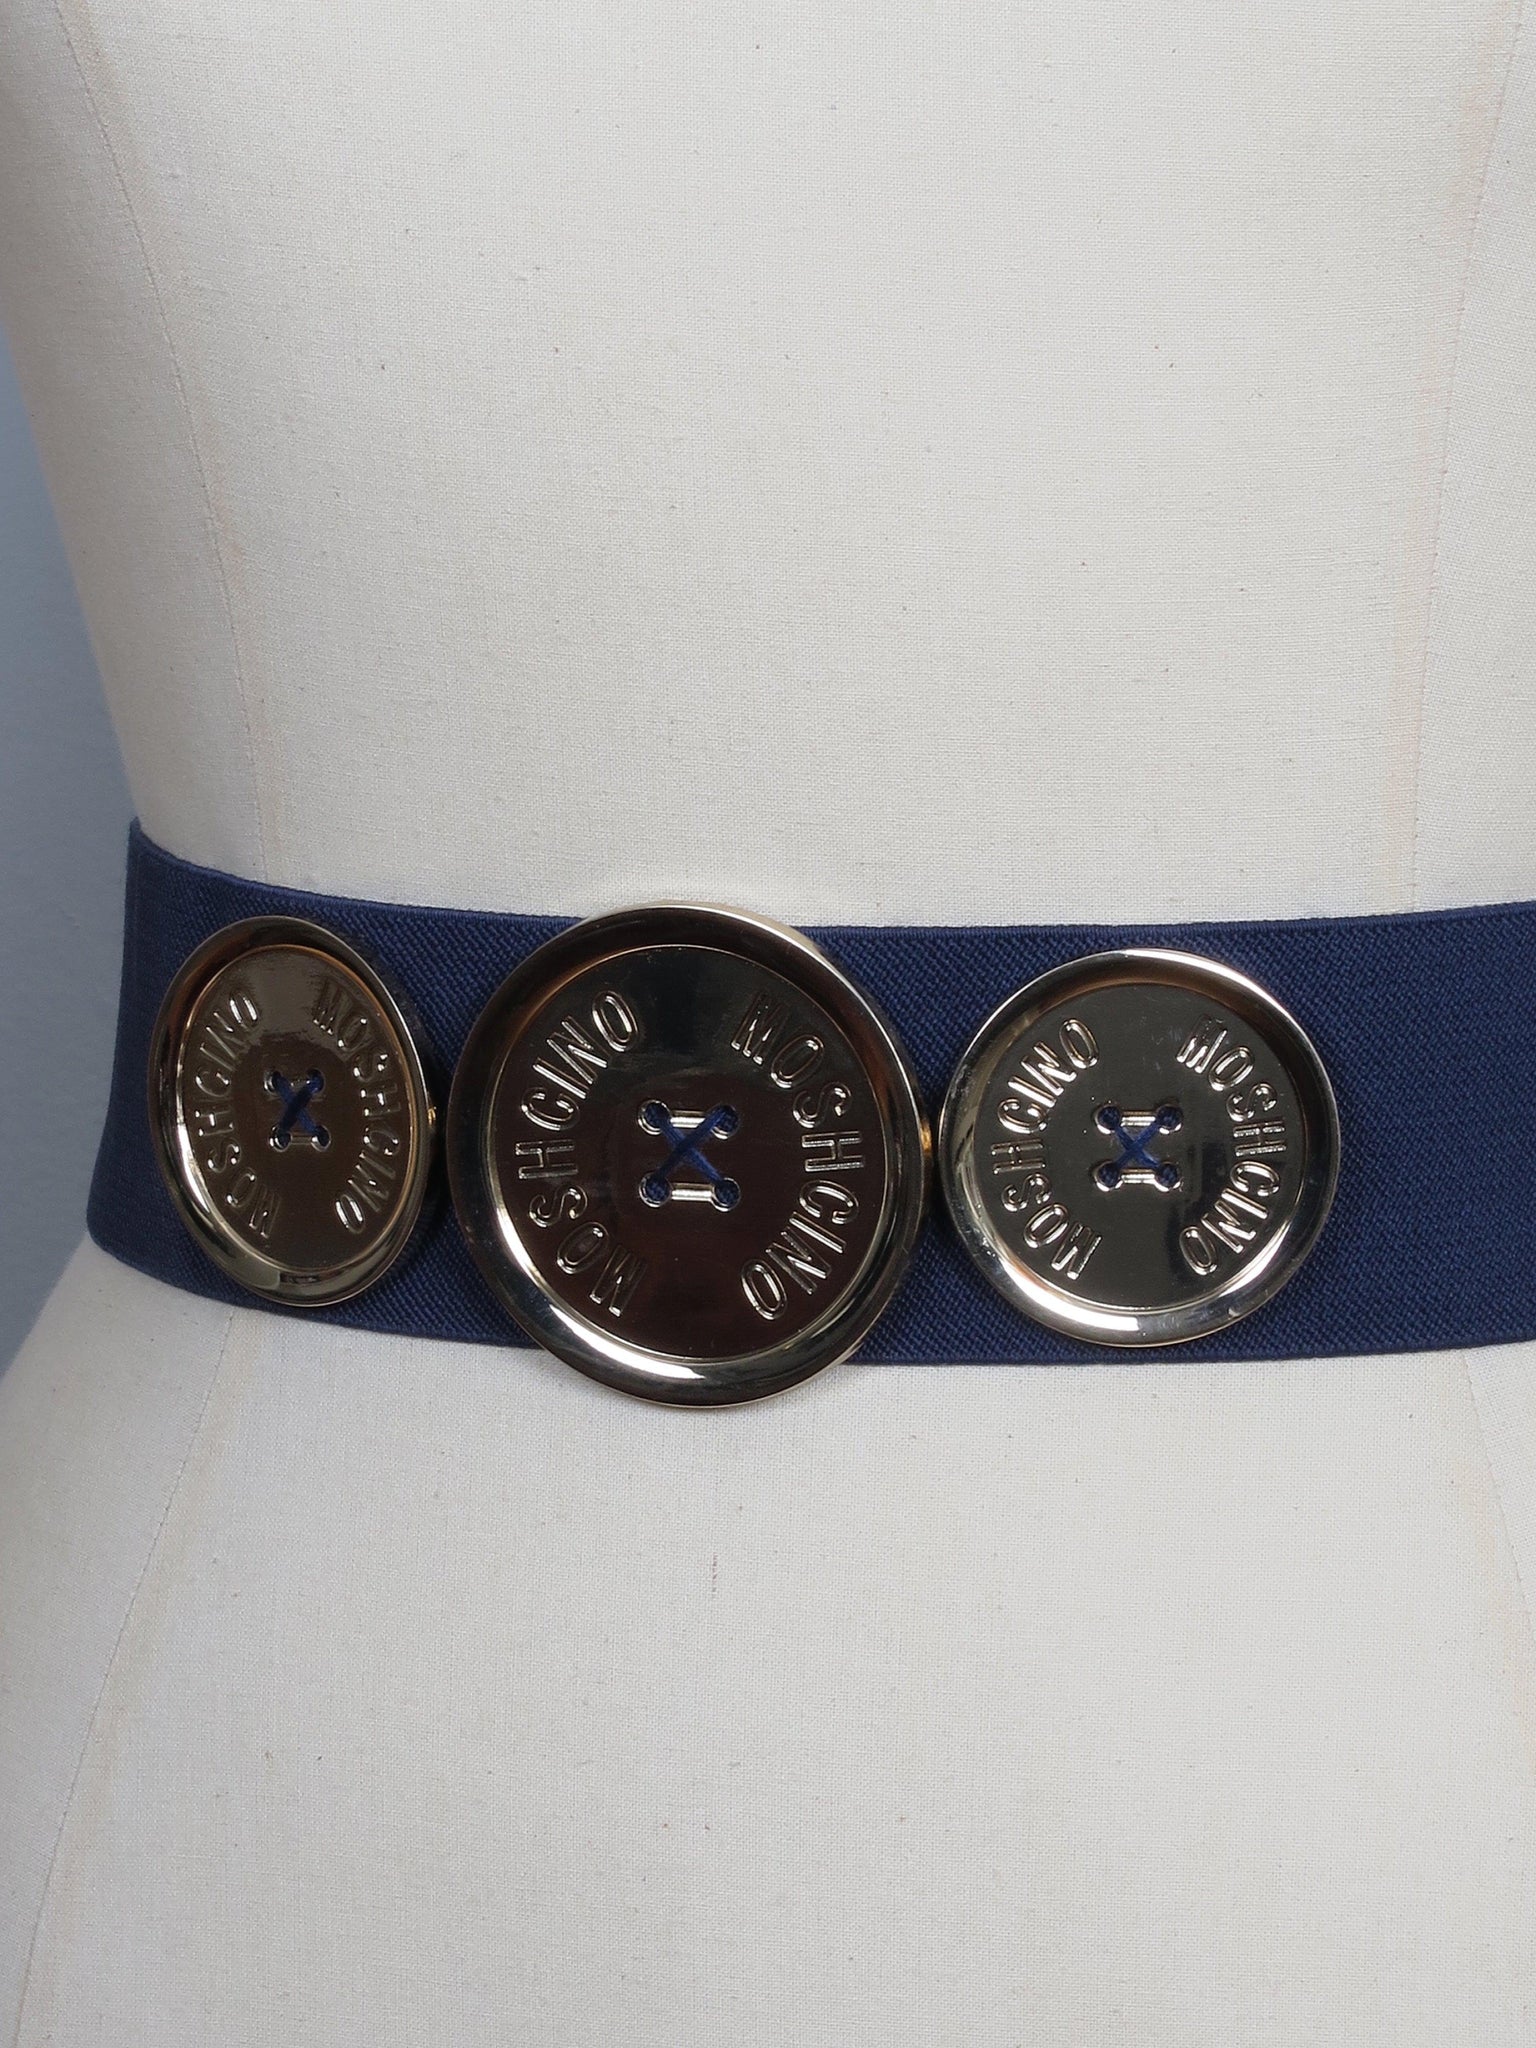 Designer Style Elastic Waspie Belt Available In Three Colours - The Harlequin